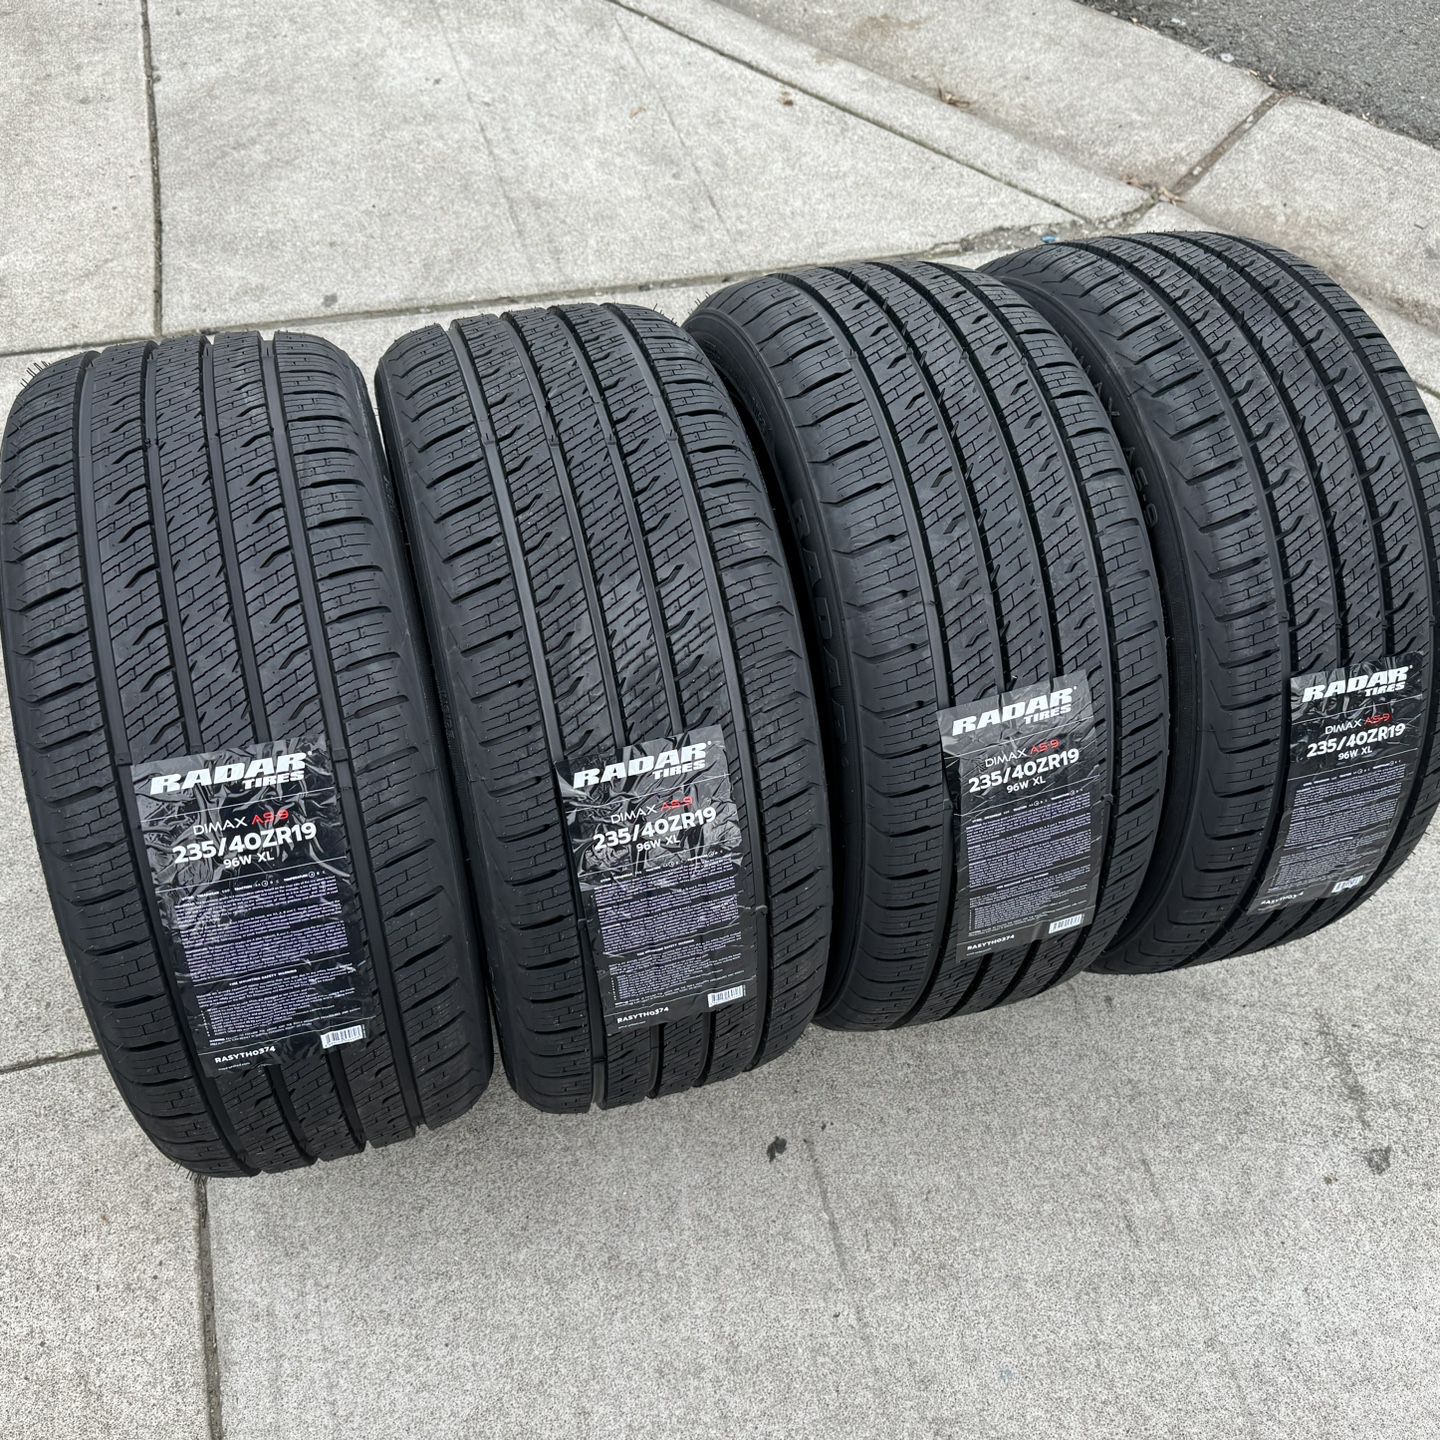 235-40-19 Tires Special Promotion 450$ Including Mounting Balance Get Free Alignment 